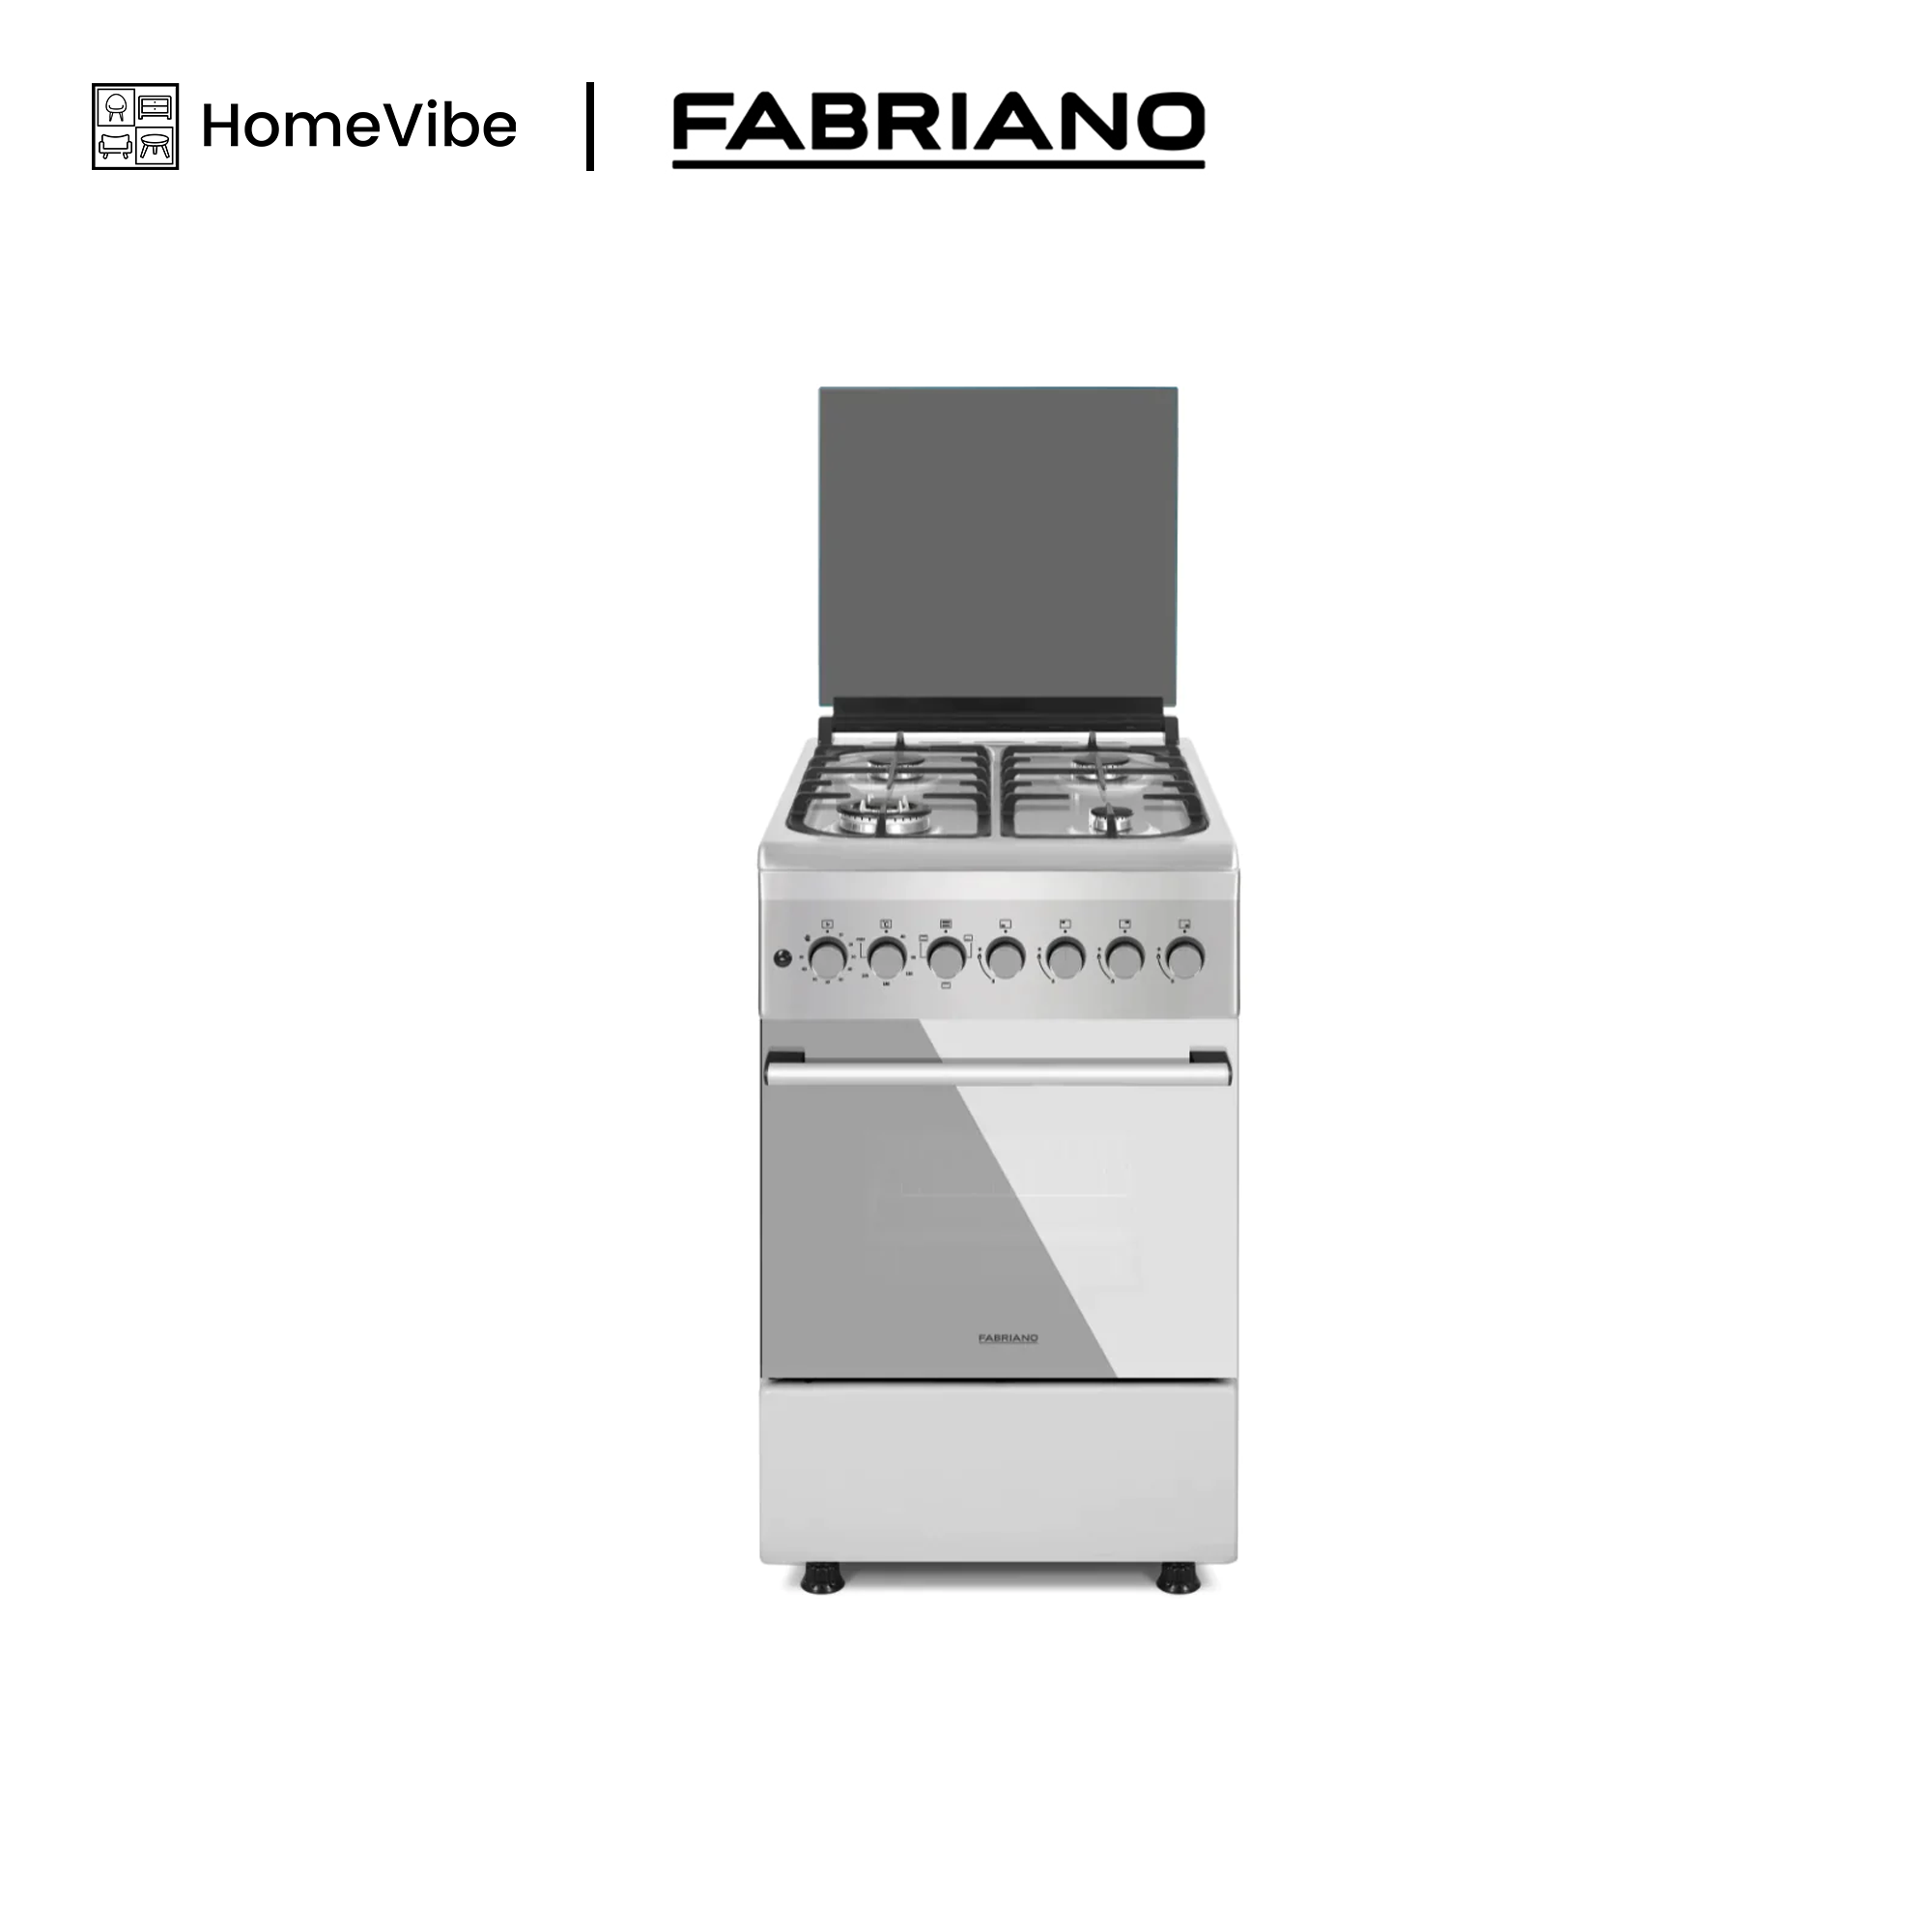 Fabriano 50cm, 4 Gas Burners + Electric Oven Free Standing Cooker F5N40E3-SS